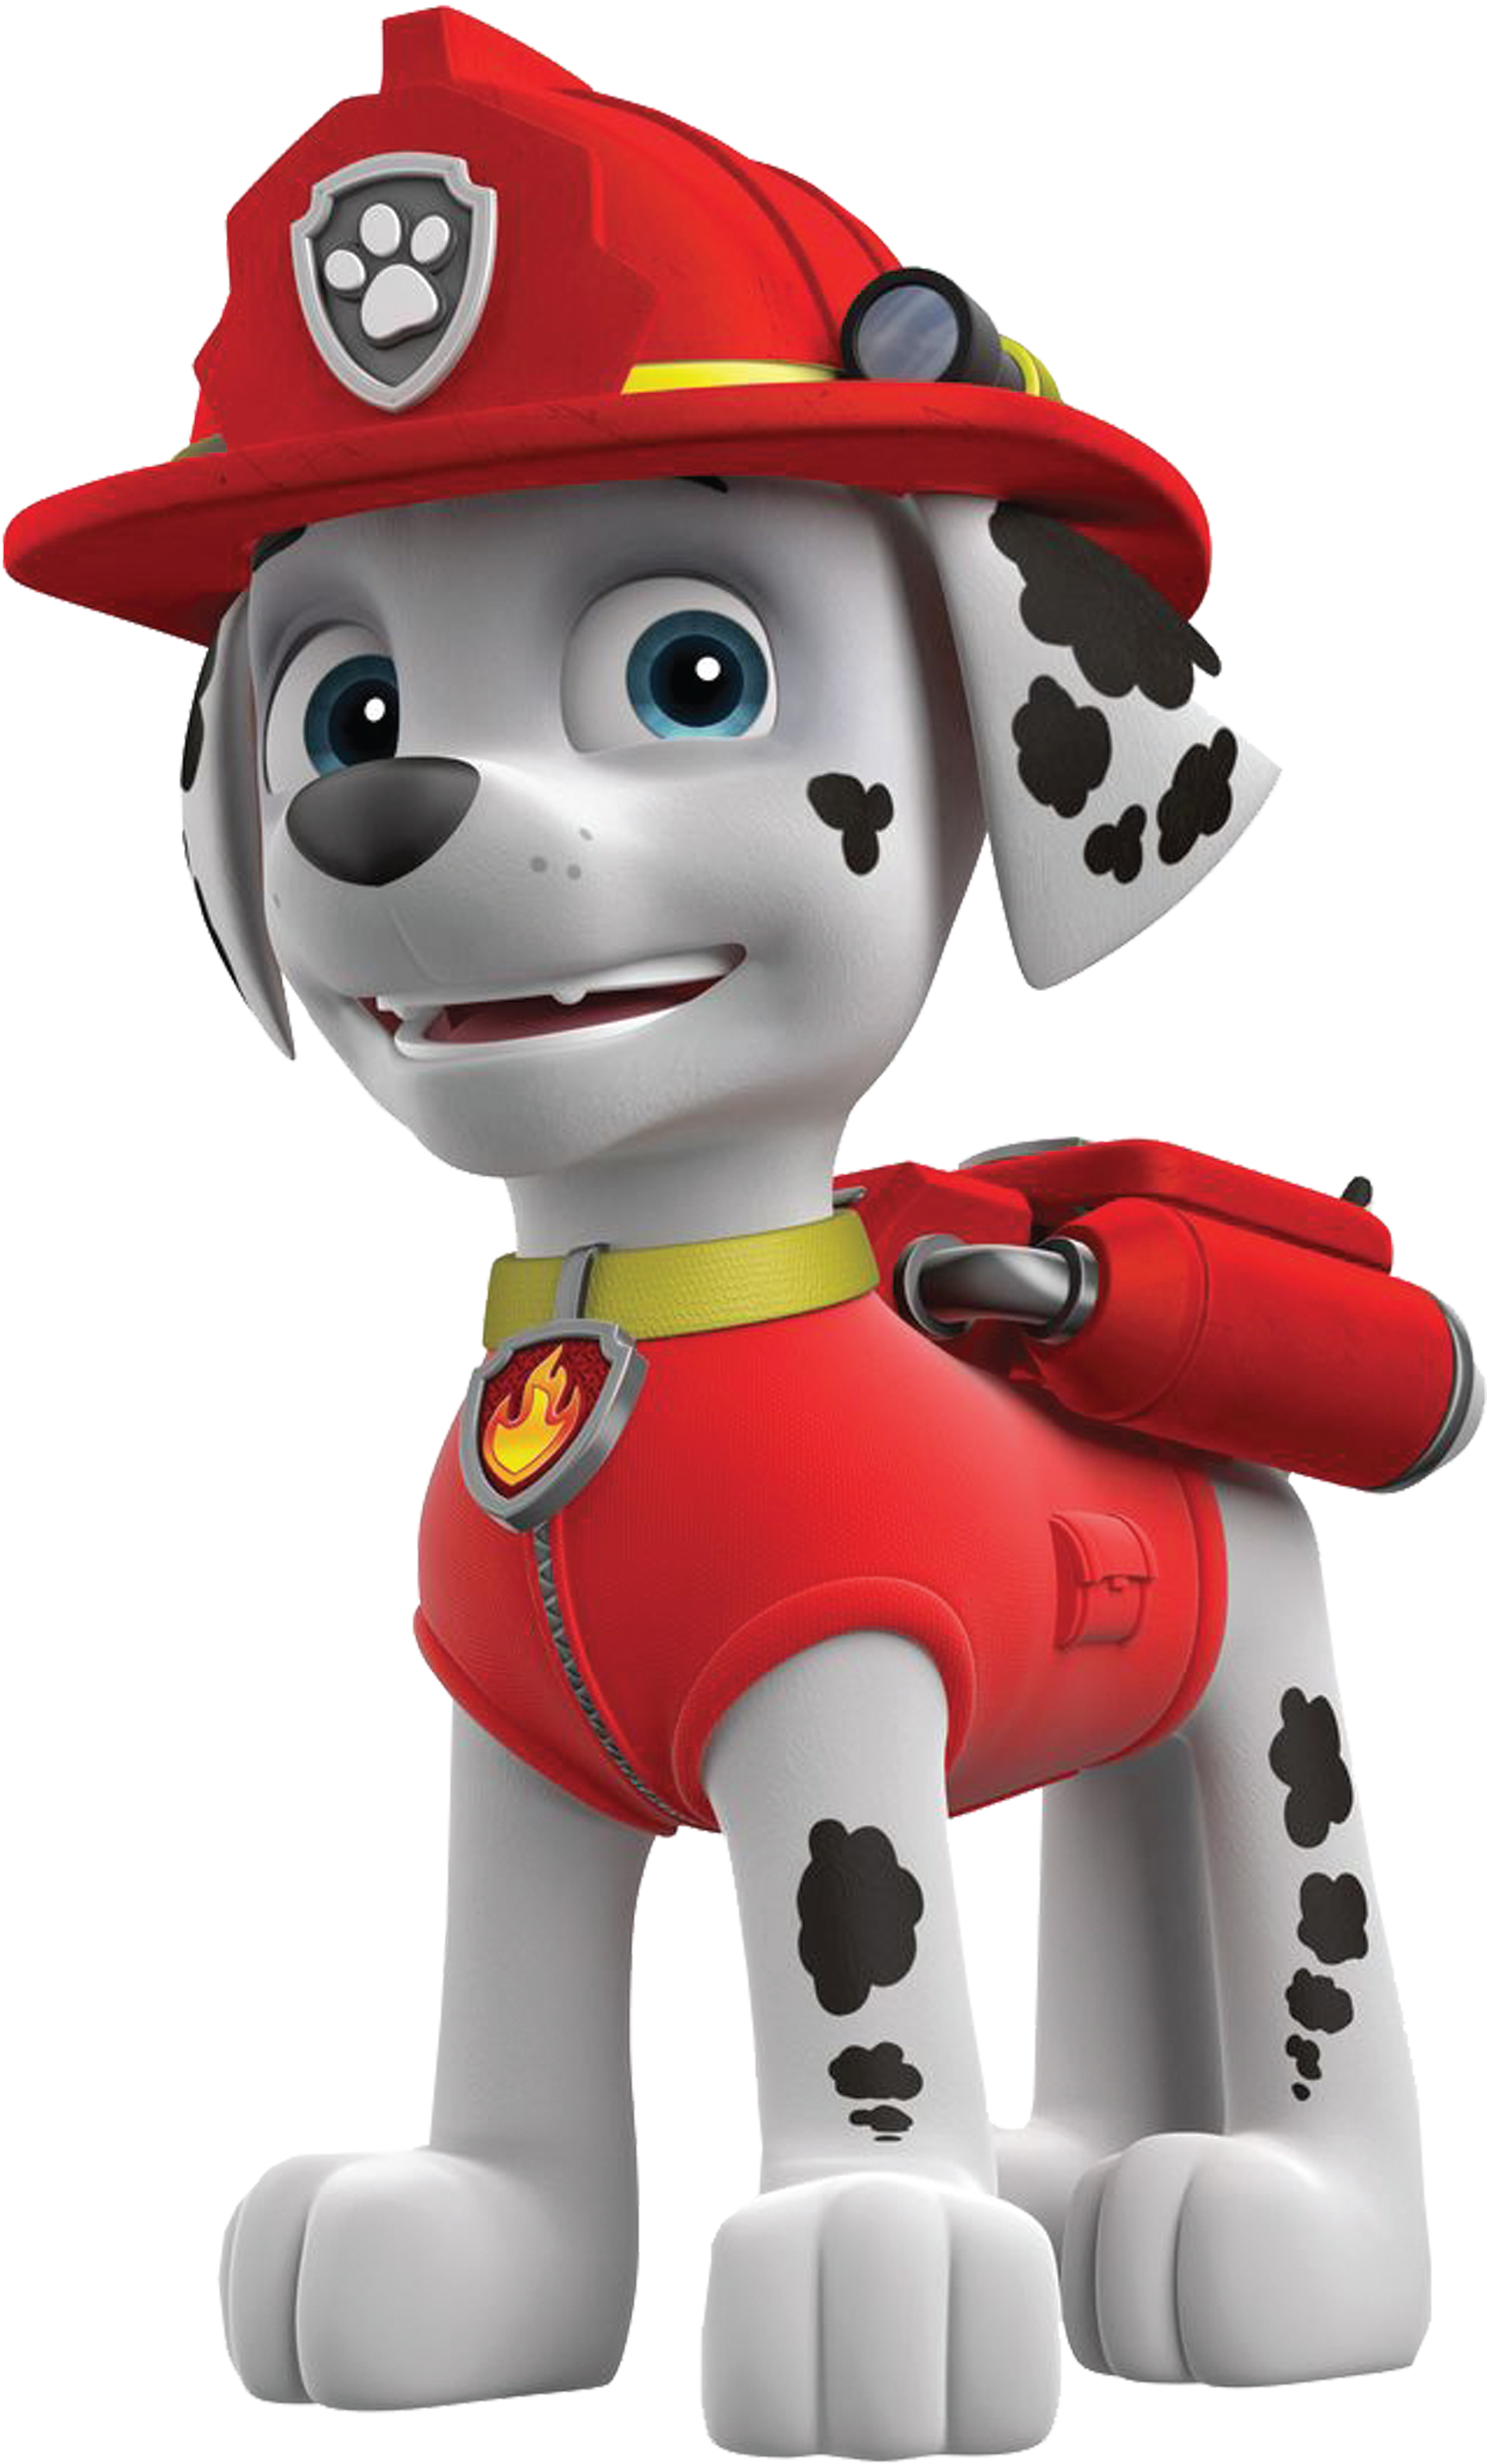 A Cartoon Dog Wearing A Red Hat And Red Uniform